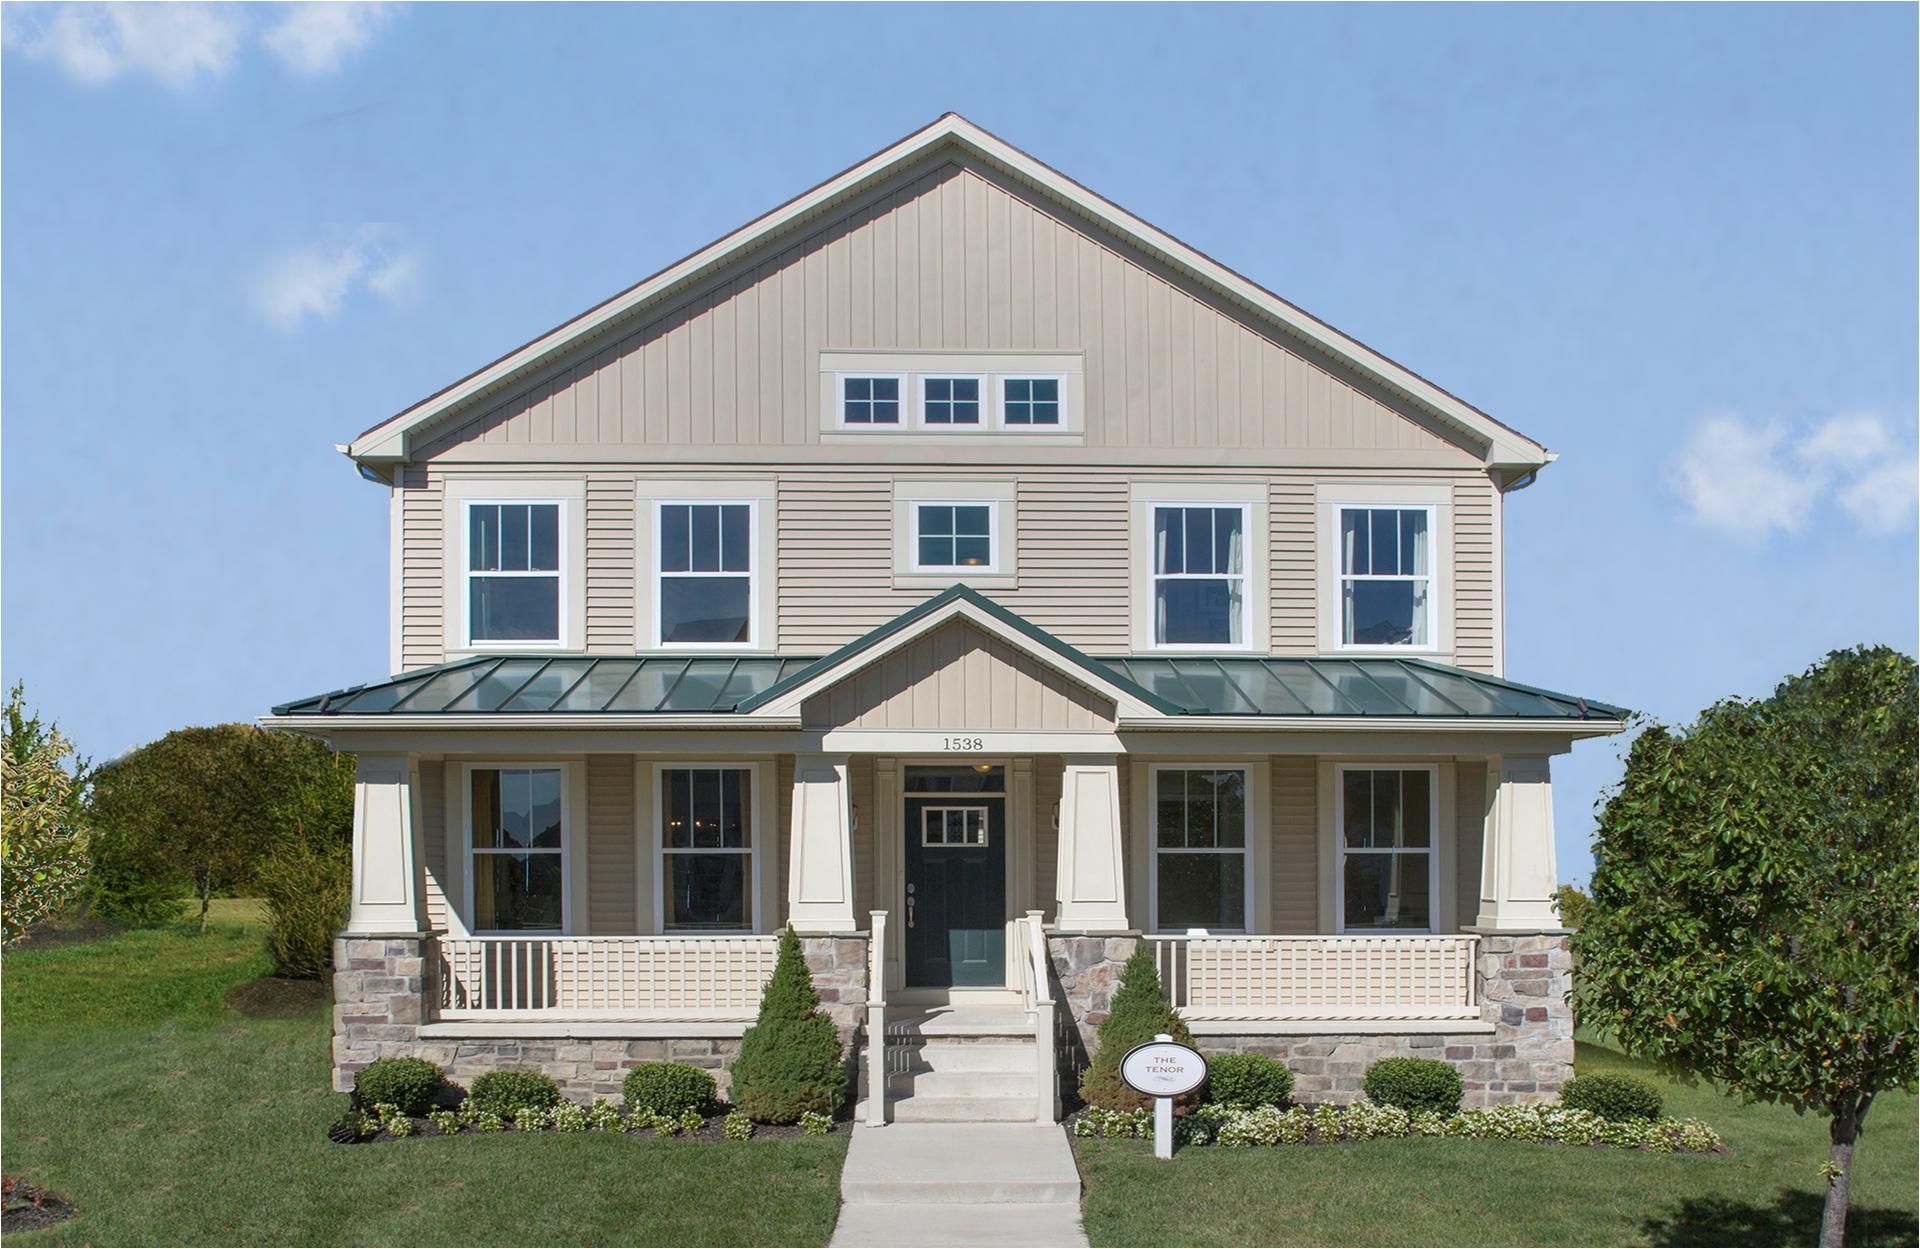 the village of bayberry in middletown de new homes floor plans by blenheim homes l p